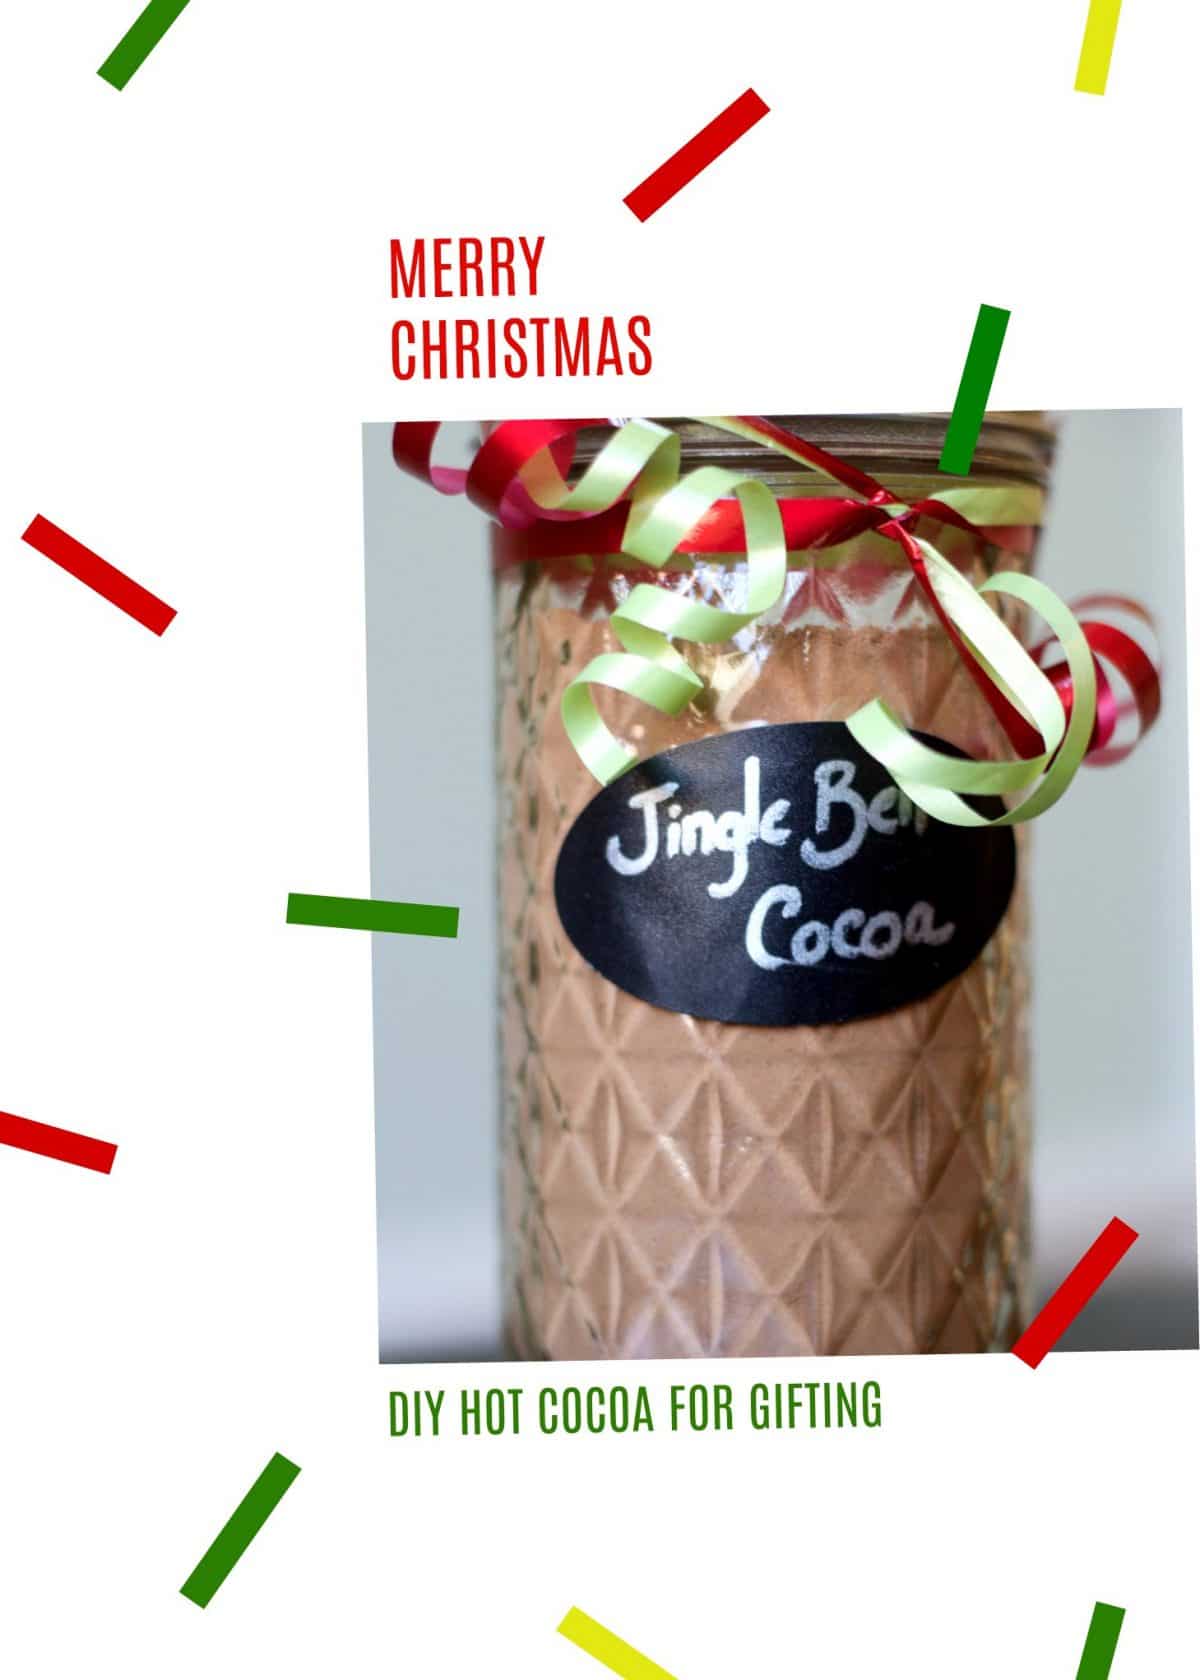 DIY Hot Cocoa || Christmas gifts | DIY | Make your own | Merry Christmas | gluten free | chocolate | dessert